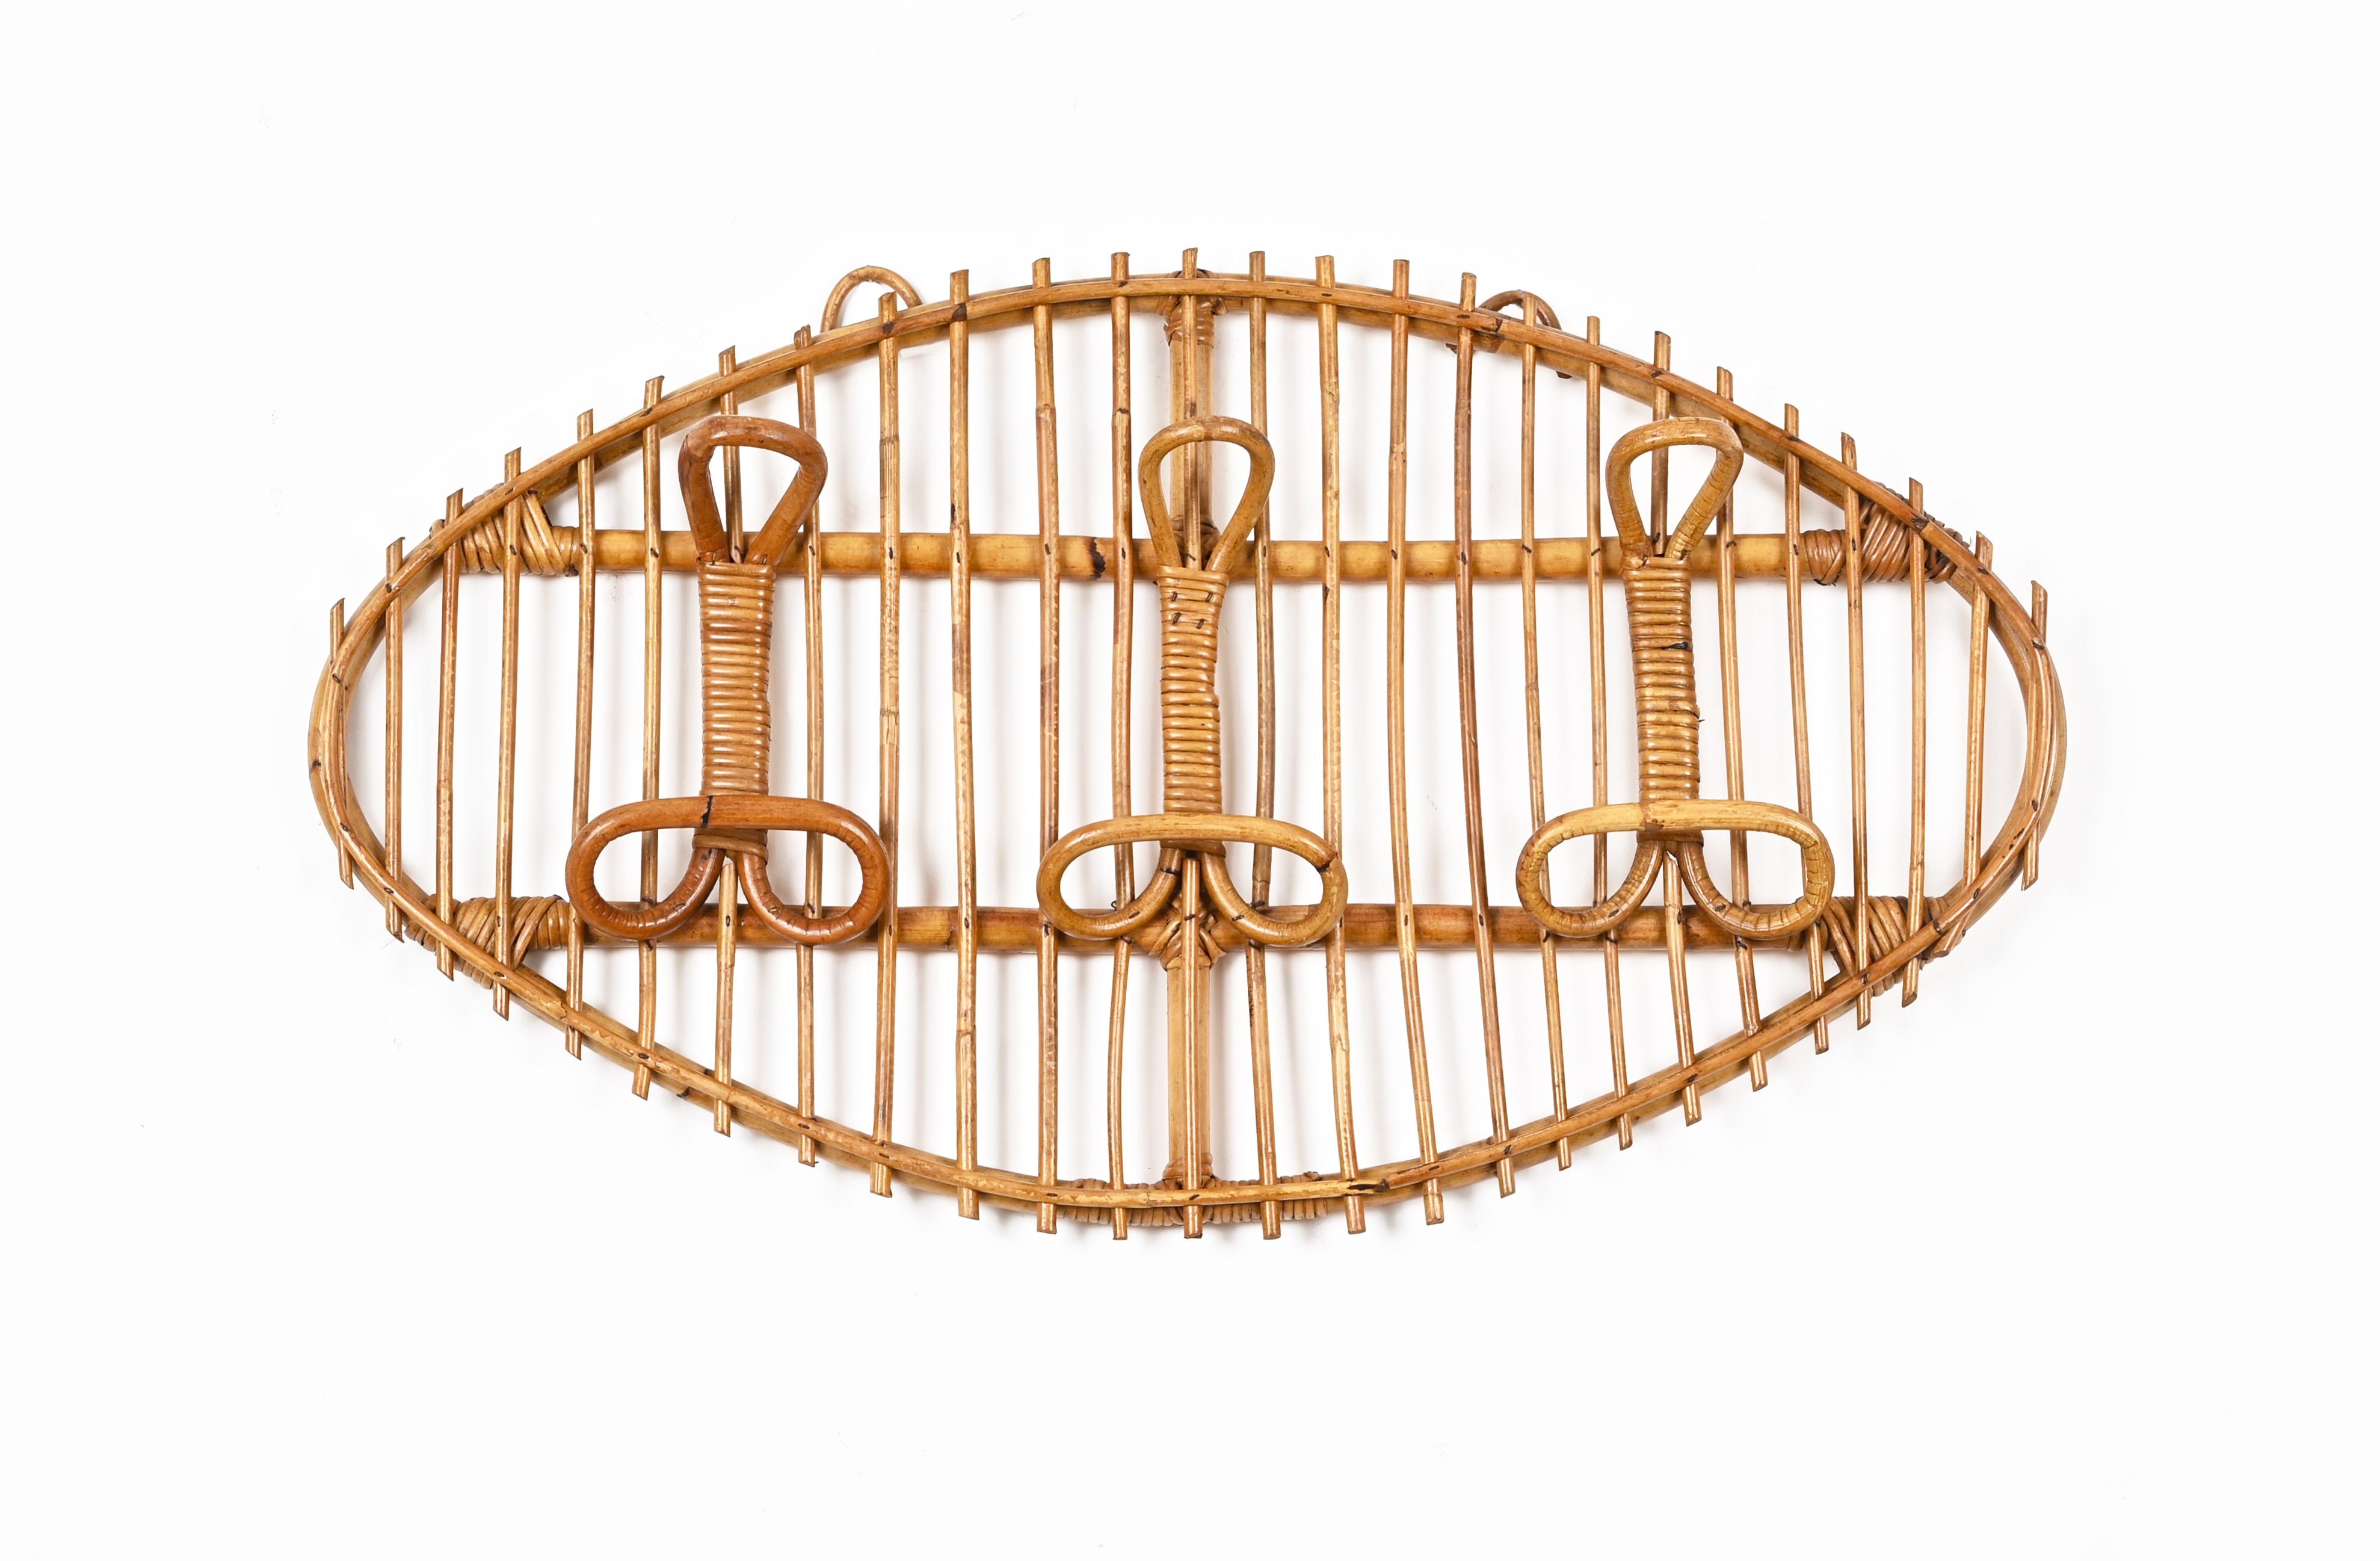 Midcentury French Riviera Rattan, Wicker, Curved Bamboo Coat Rack, Italy 1960s For Sale 2